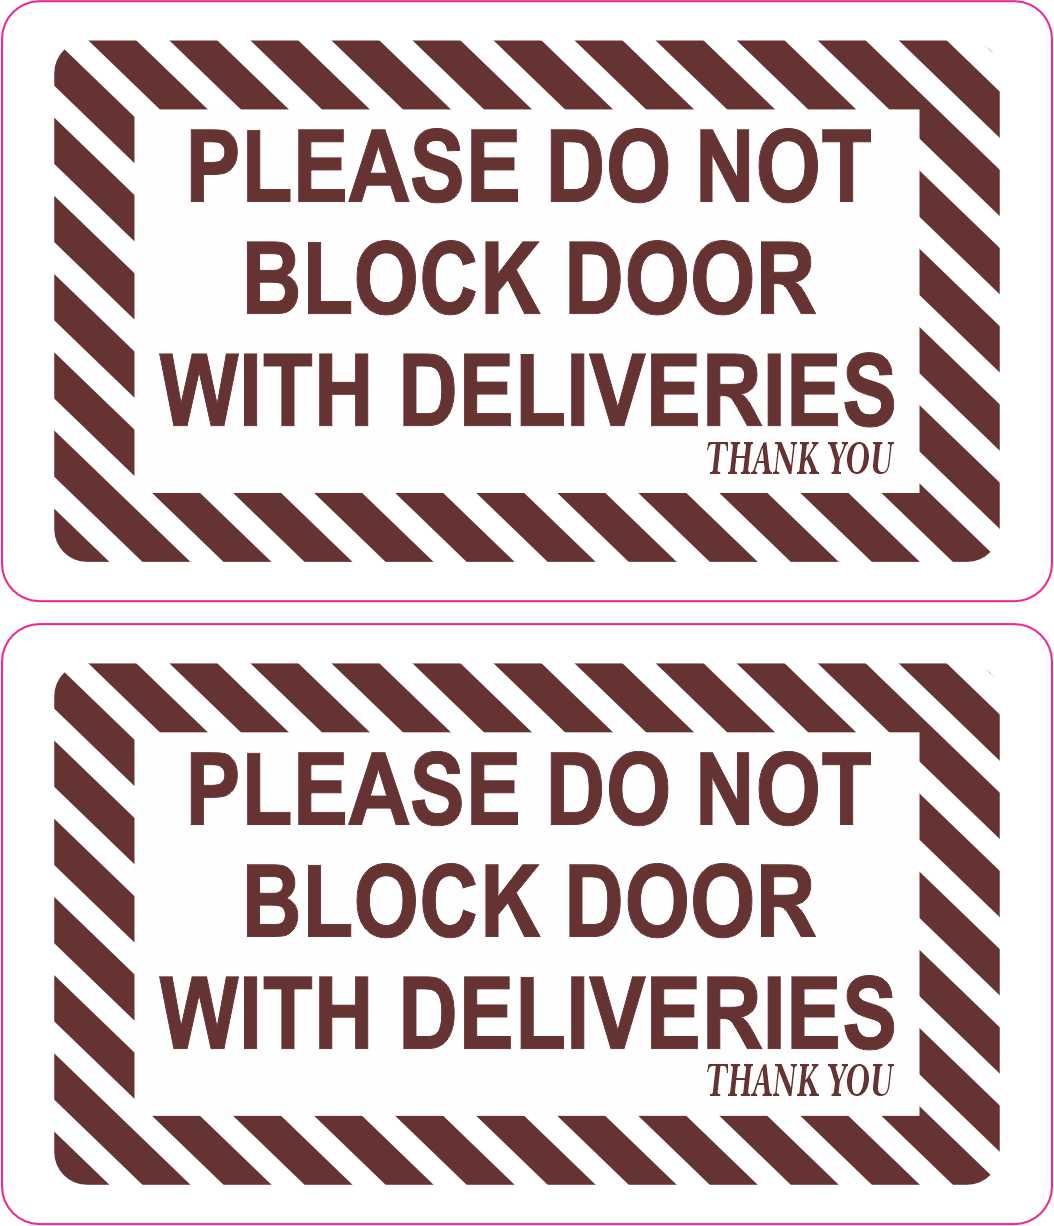 Stickertalk Do Not Block Door With Deliveries Vinyl Stickers 1 Sheet Of 2 Stickers 35 Inches 